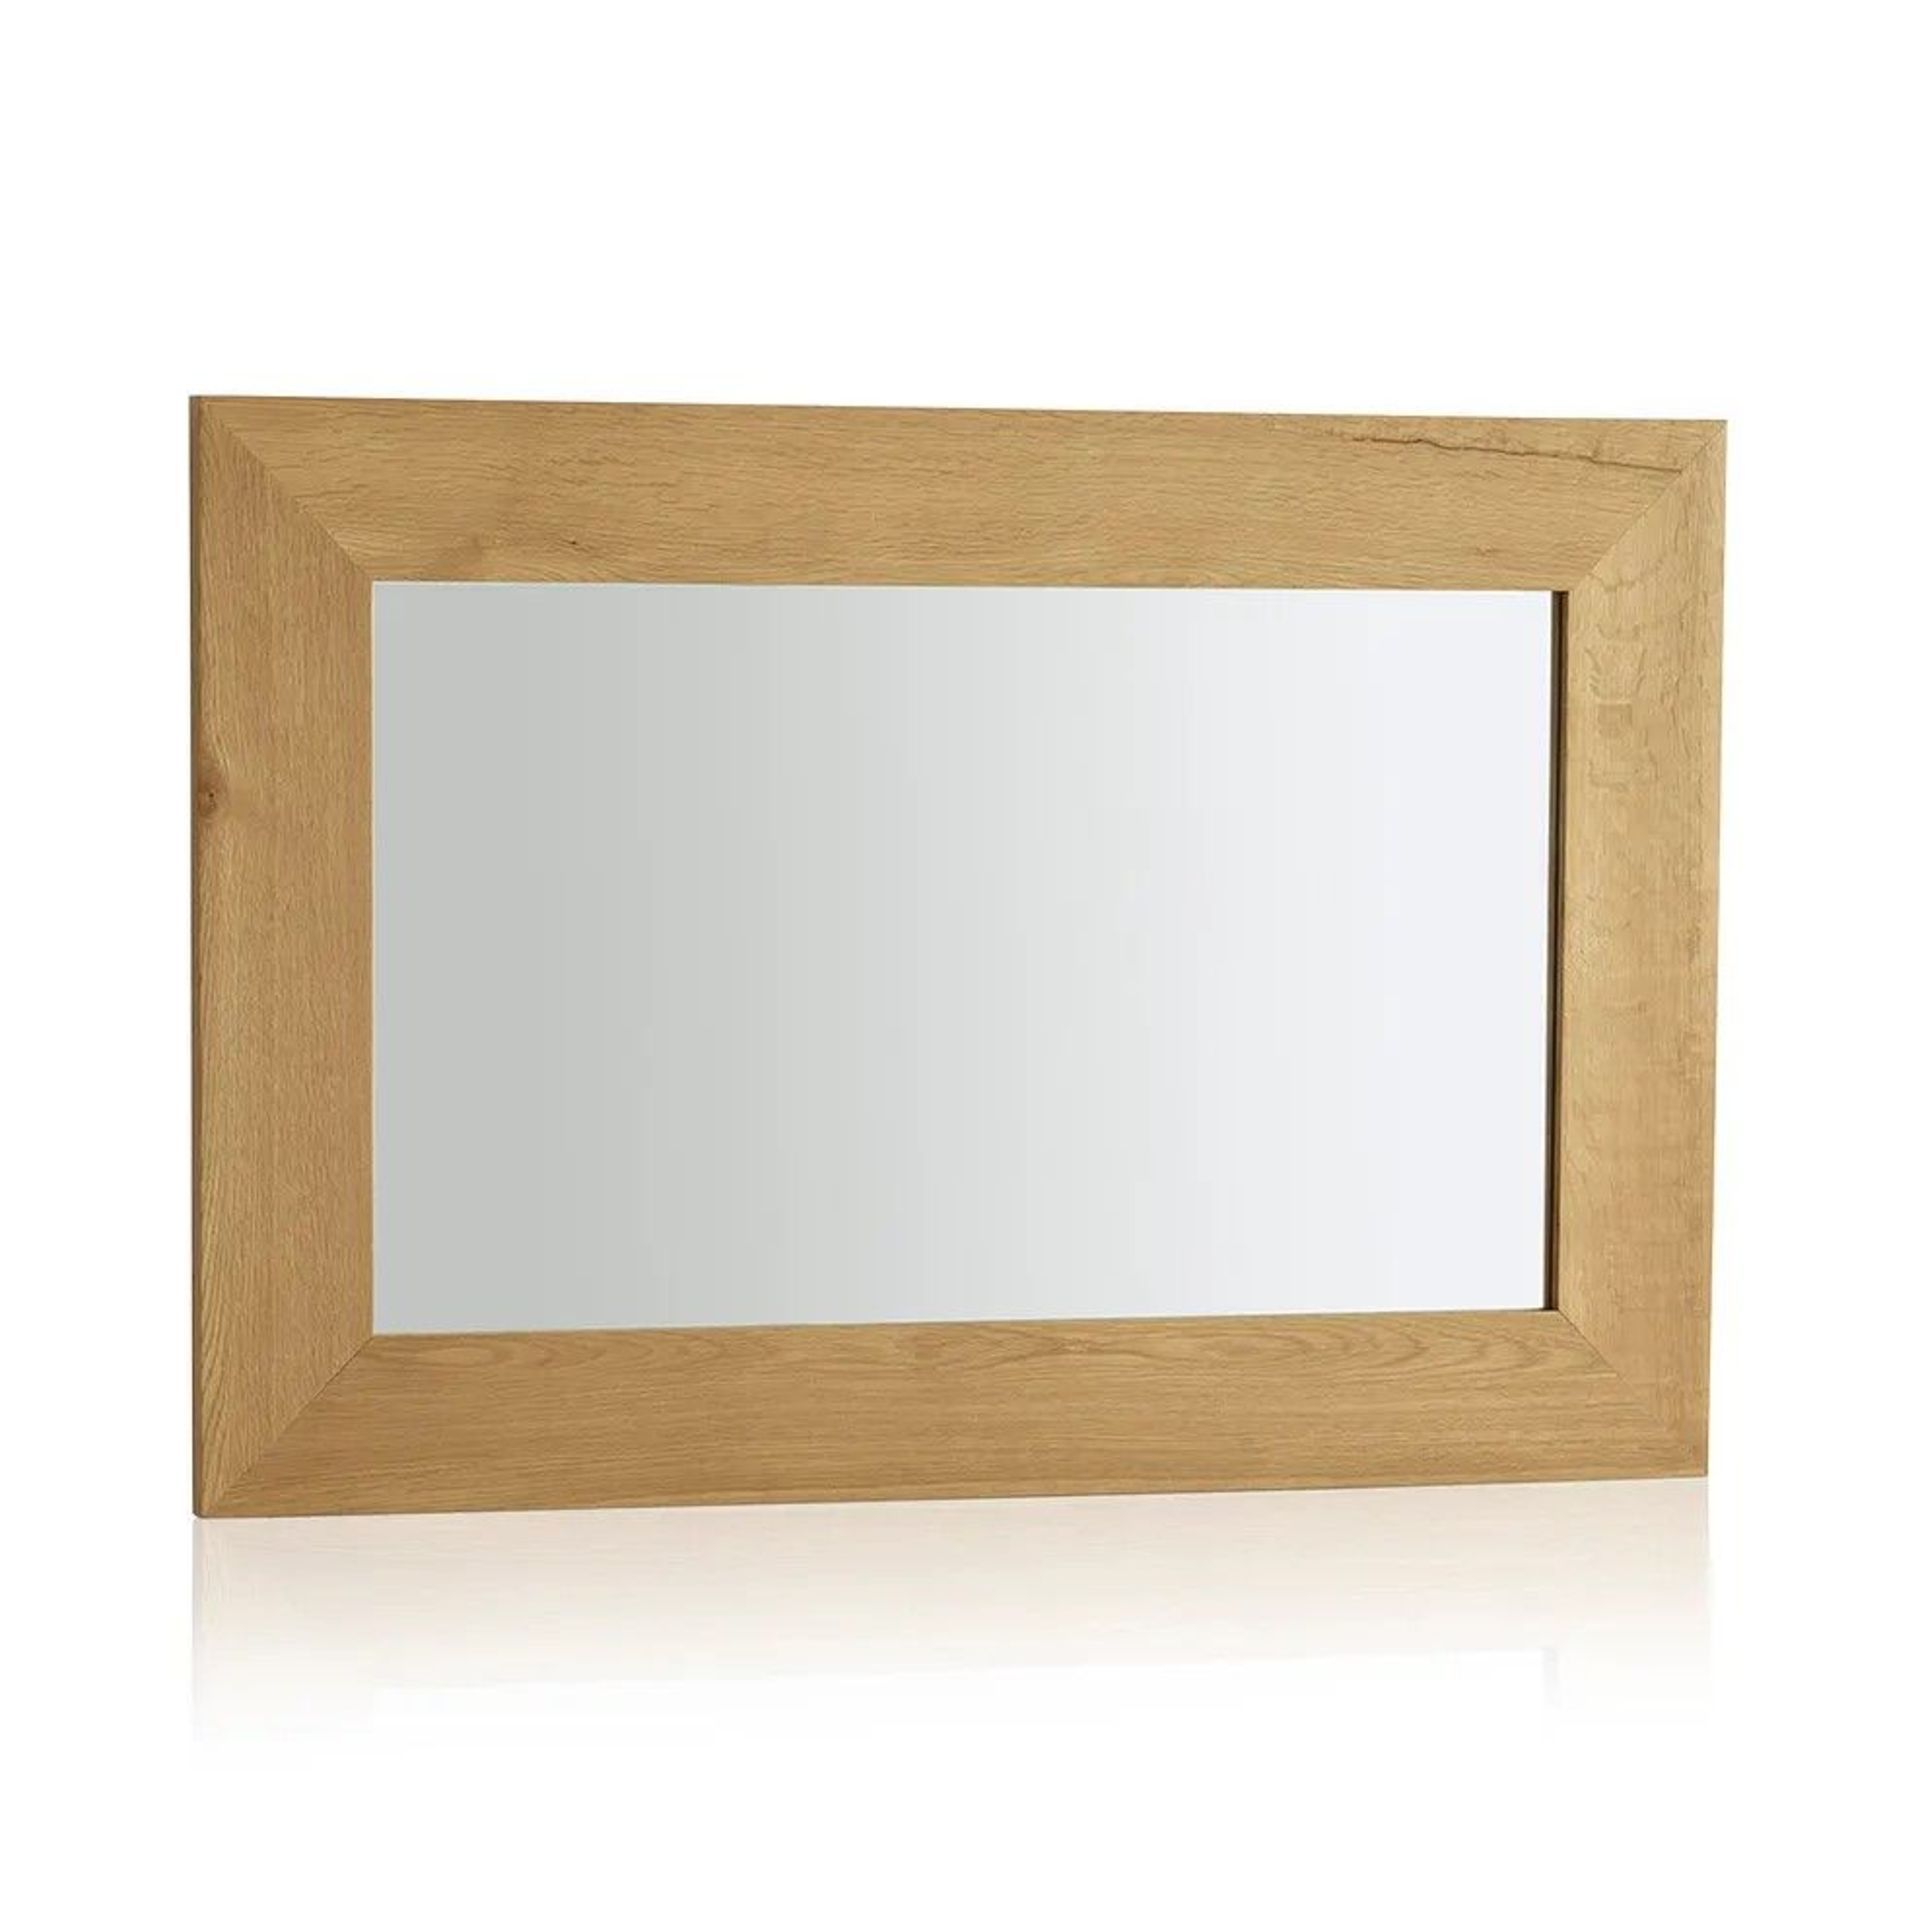 5 X NEW BOXED Cosmopolitan Mirror Natural Solid Oak 900mm x 600mm Wall Mirror. RRP £269.99 EACH. - Image 2 of 2